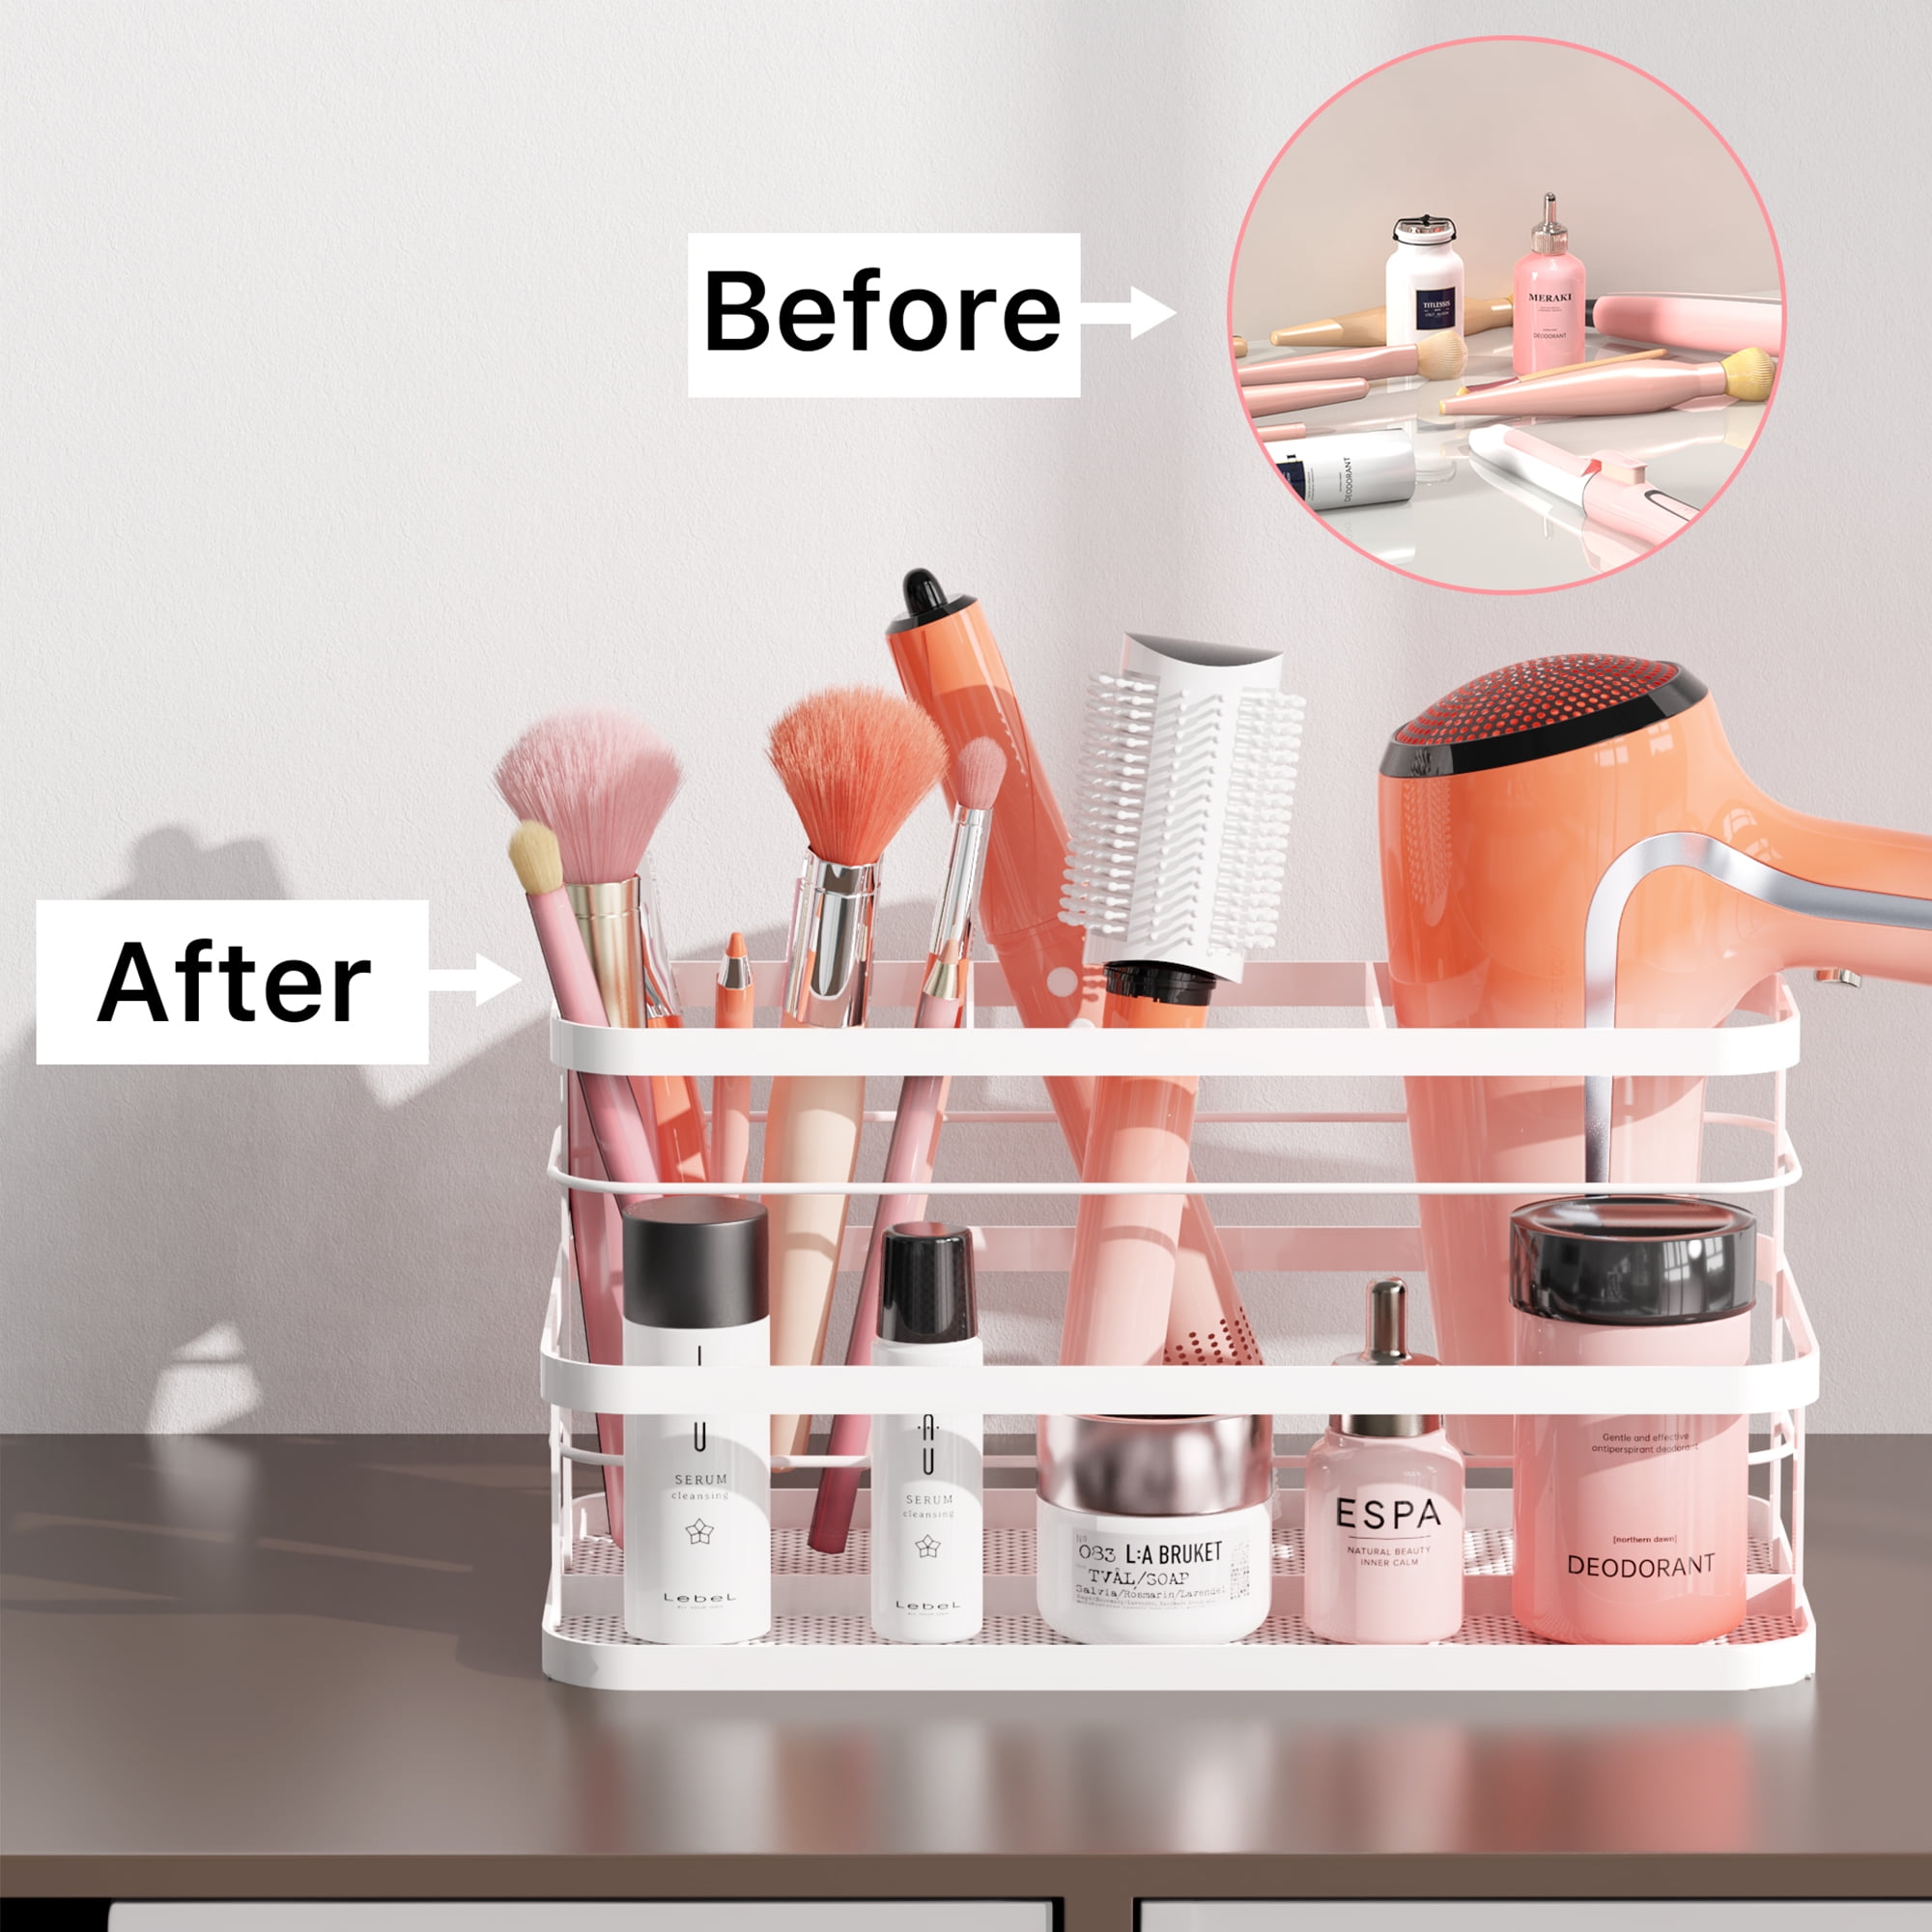 YIGII Hair Tool Organizer - Bathroom Counter Organizer Hair Dryer Holder,  Vanity Caddy with Removable Cup Storage for Hair Dryer Accessories, Makeup